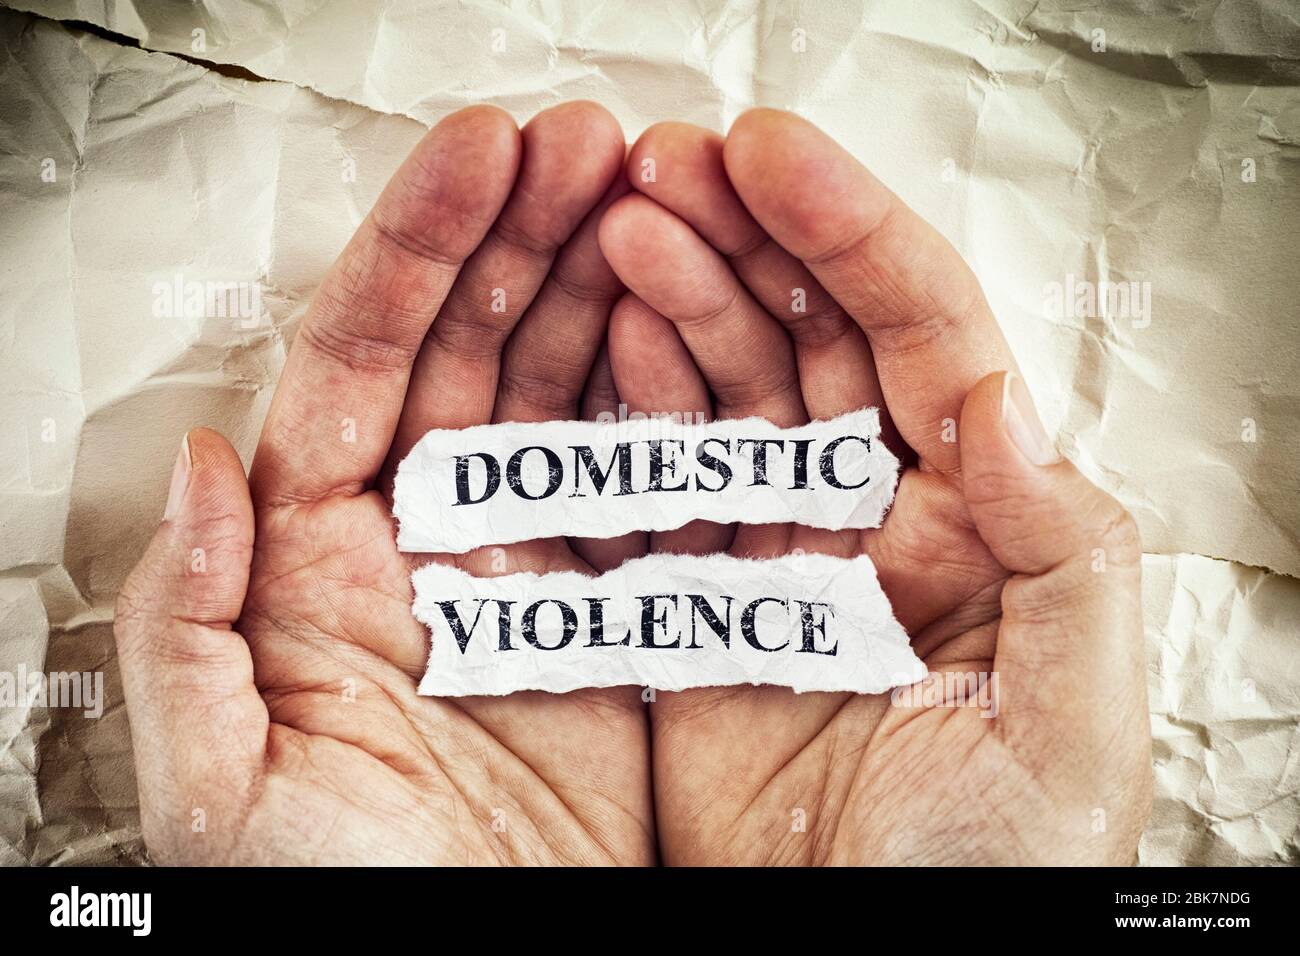 Domestic violence. Woman holding torn pieces of paper with the words Domestic Violence written on them in her palms. Concept Image. Closeup. Stock Photo